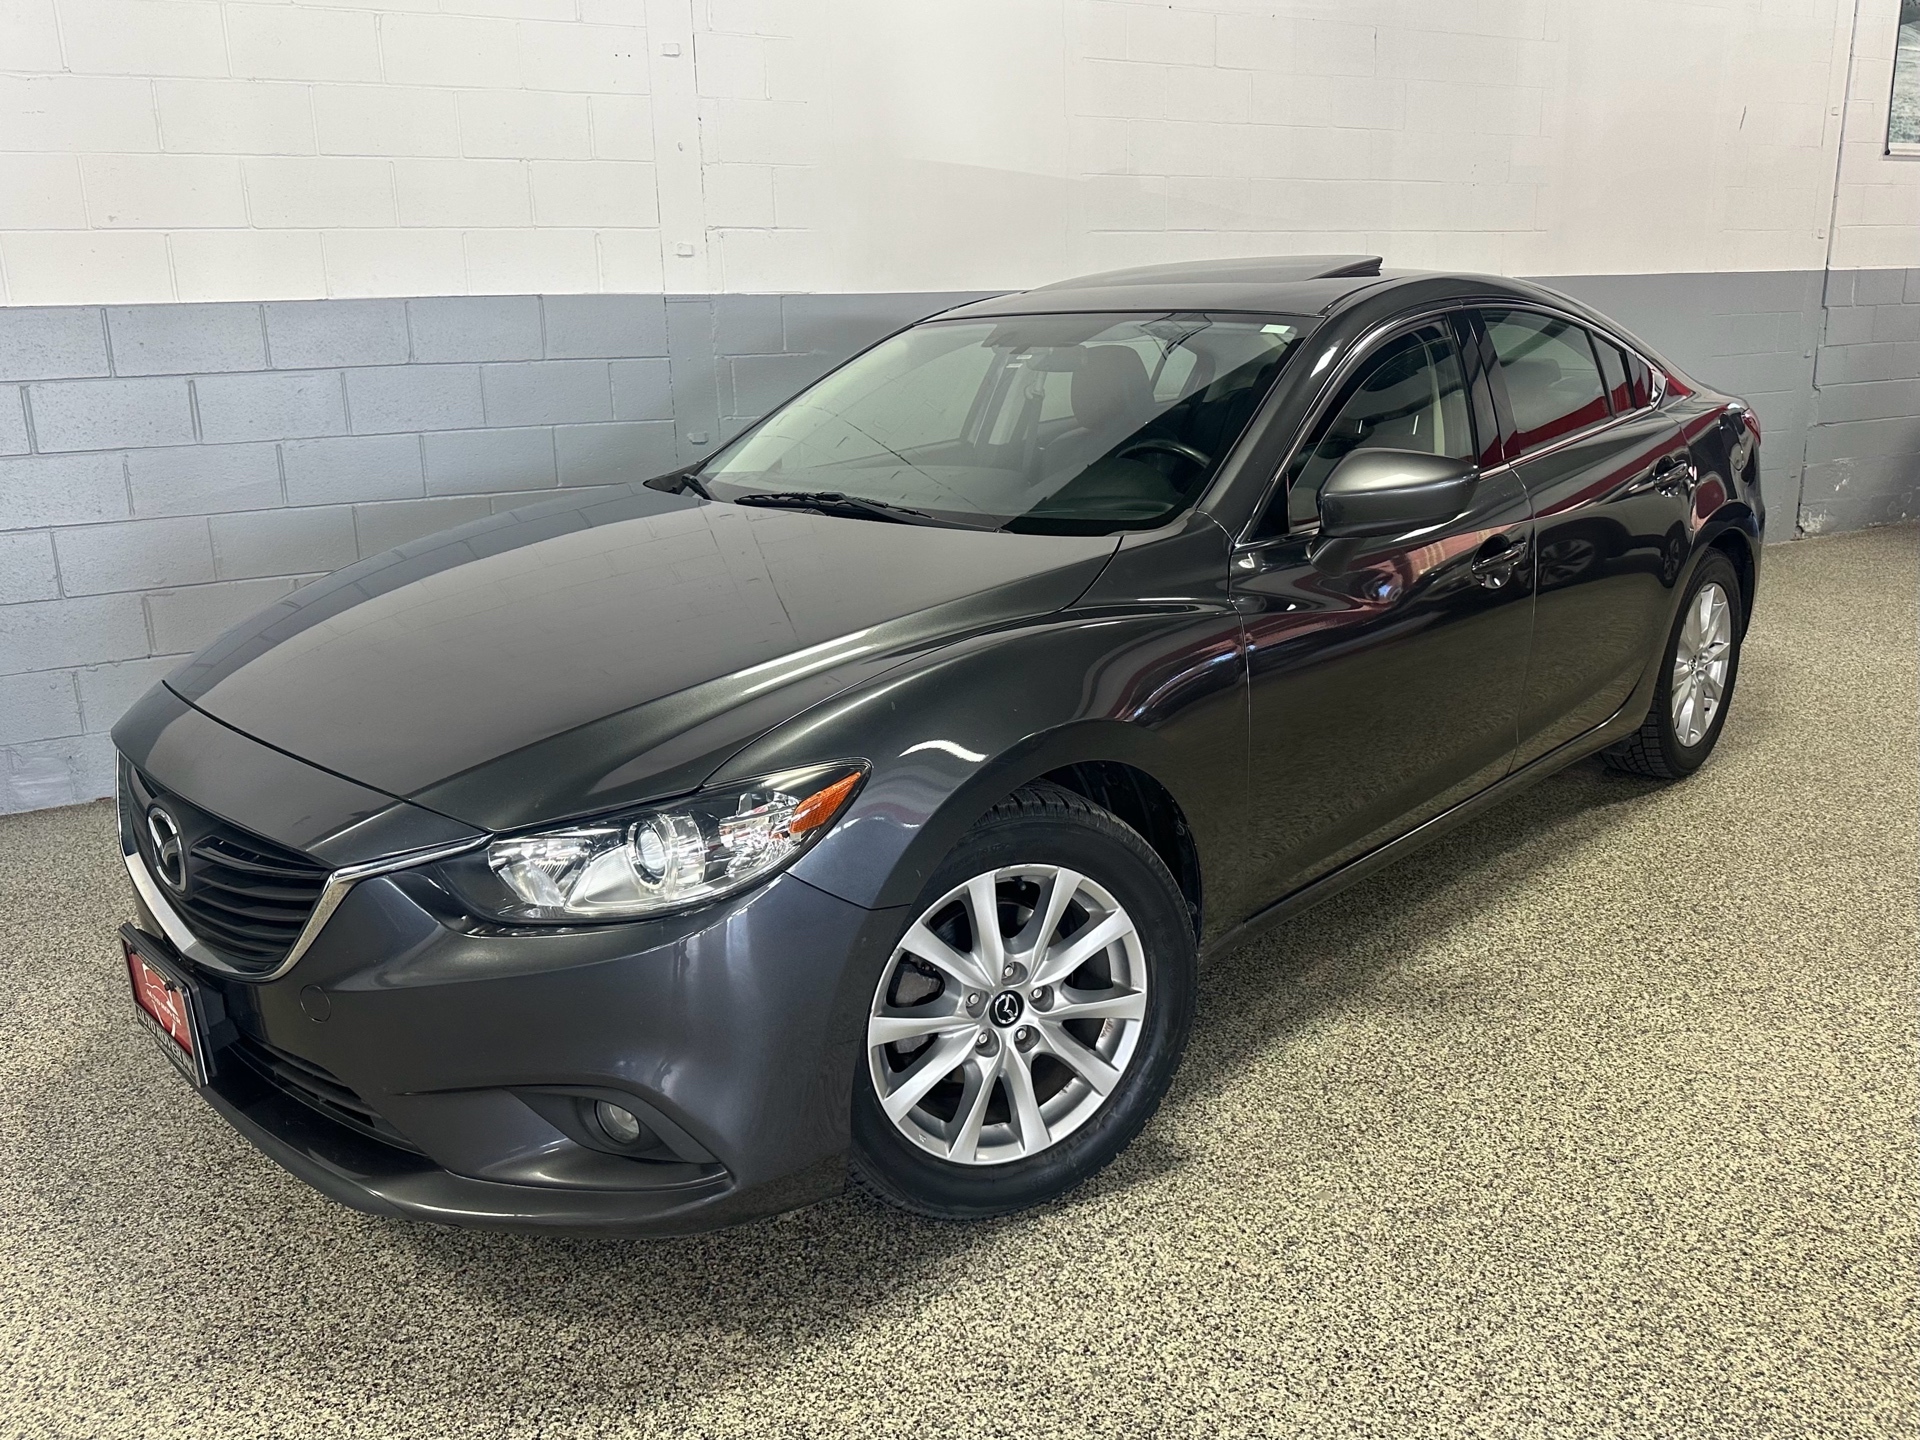 2014 Mazda 6 TOURING GS 2.5L/1 OWNER/NO ACCIDENTS/NAVIGATION/REARVIEW CAME